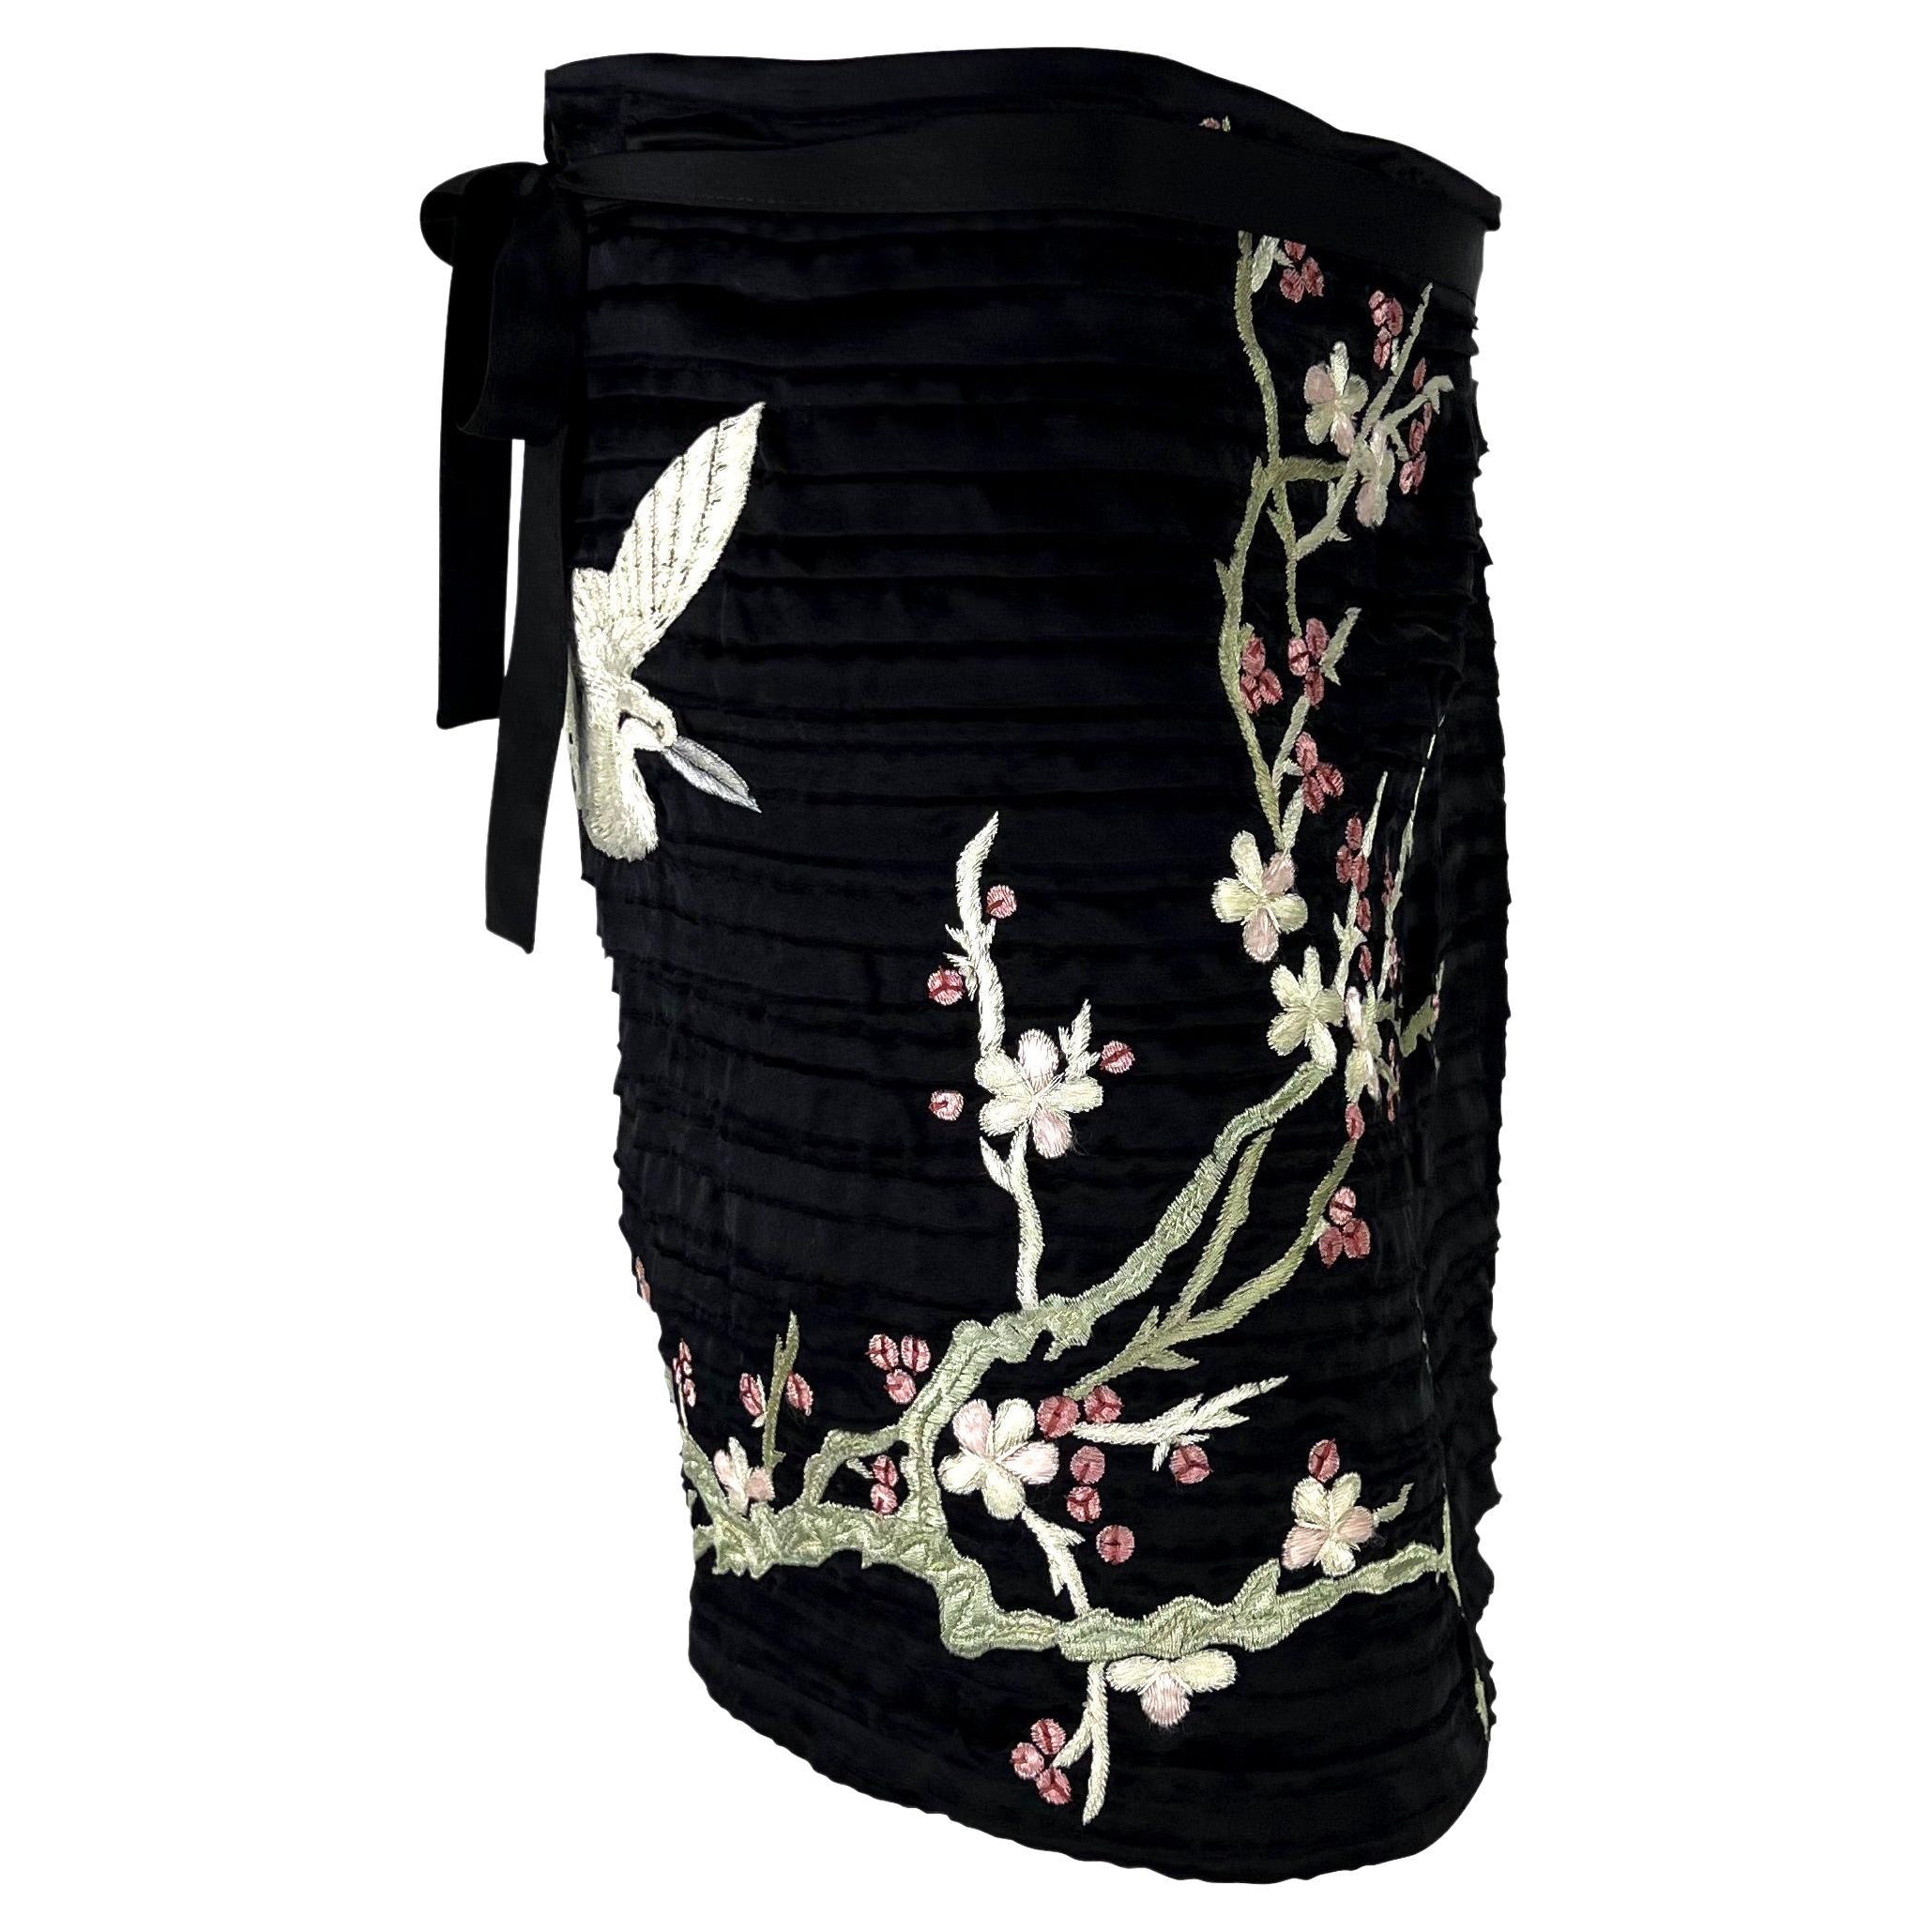 S/S 2003 Gucci by Tom Ford Japanese Cherry Blossom Embroidered Mini Wrap Skirt 1